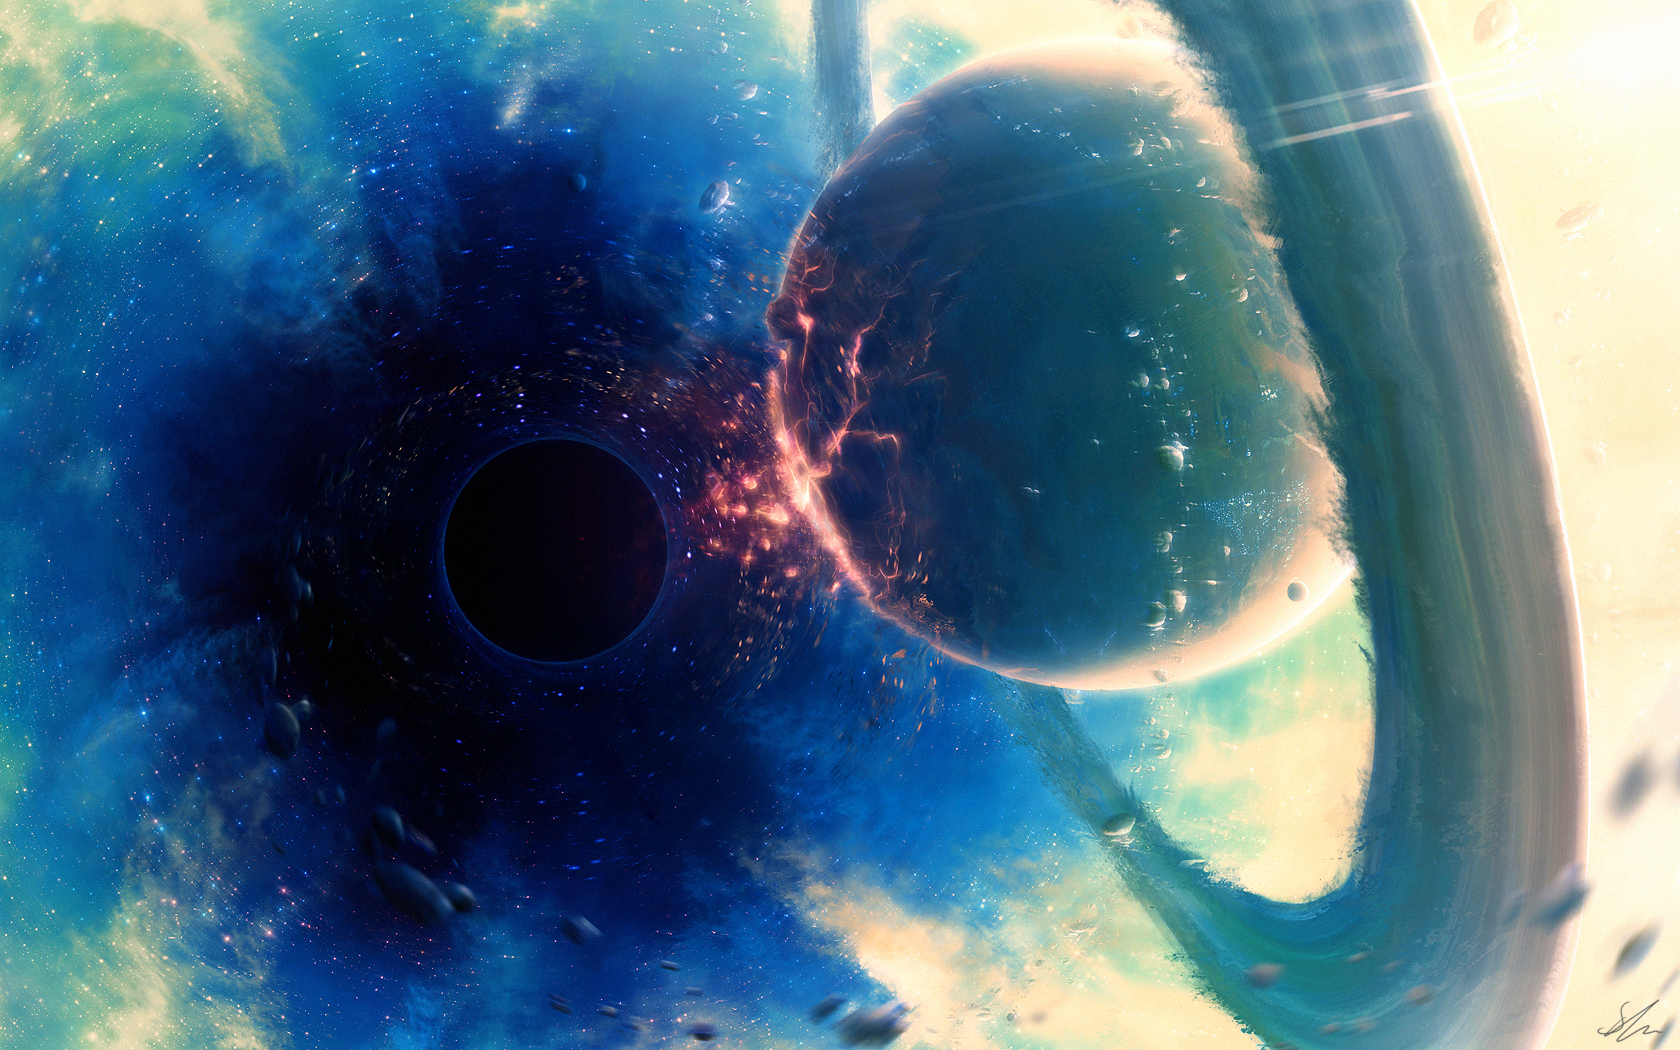 Wallpaper, digital art, planet, vehicle, Earth, space art, blue, underwater, circle, universe, destruction, black holes, biology, screenshot, computer wallpaper, atmosphere of earth, outer space, astronomical object 1680x1050